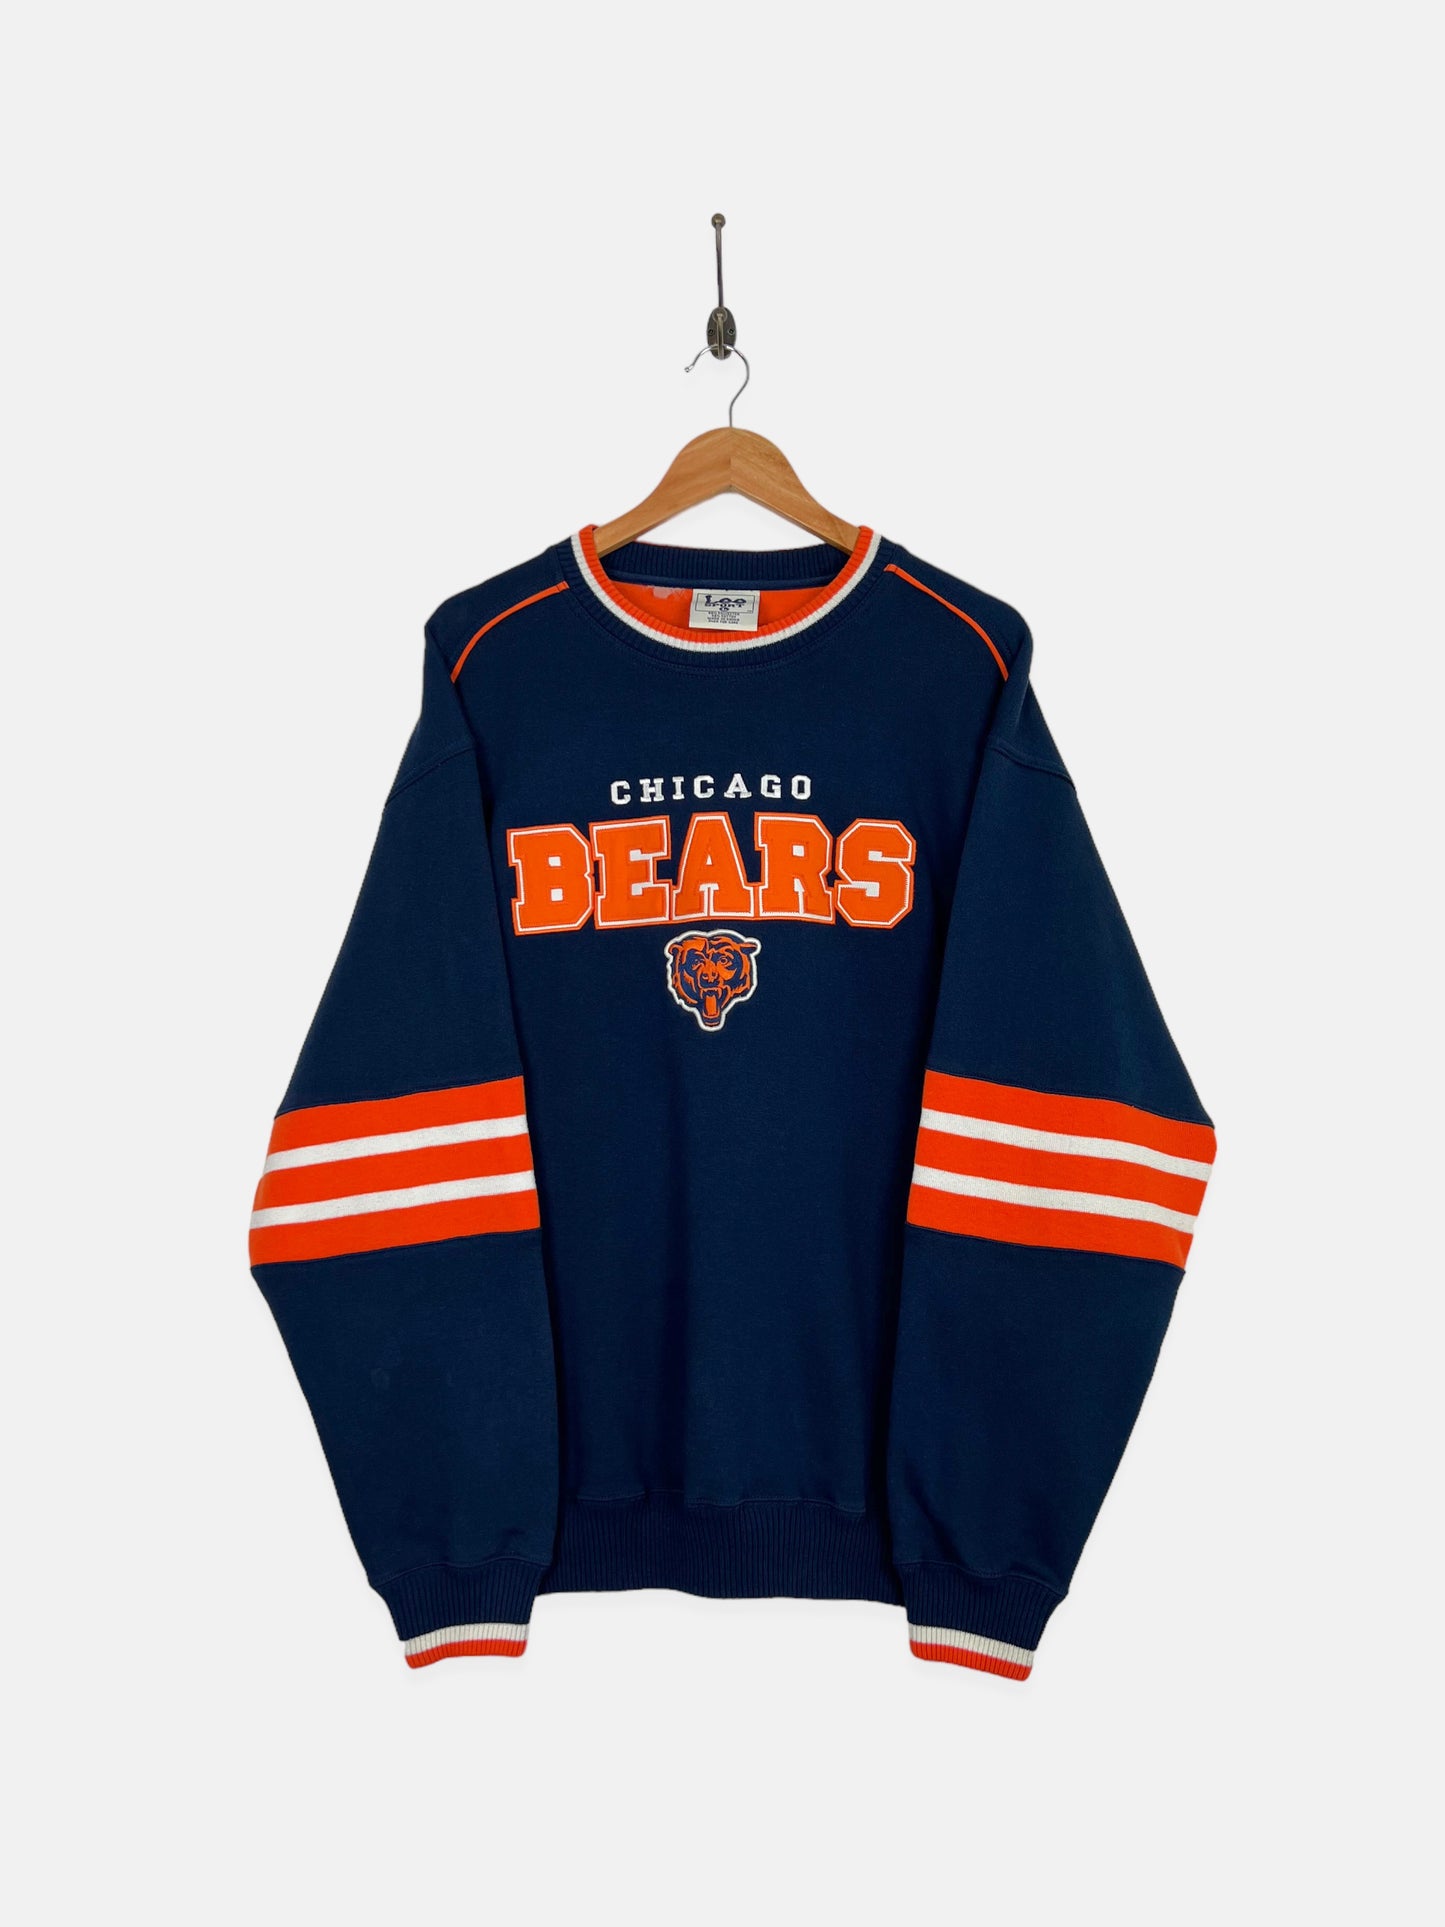 90's Chicago Bears NFL Embroidered Vintage Sweatshirt Size XL